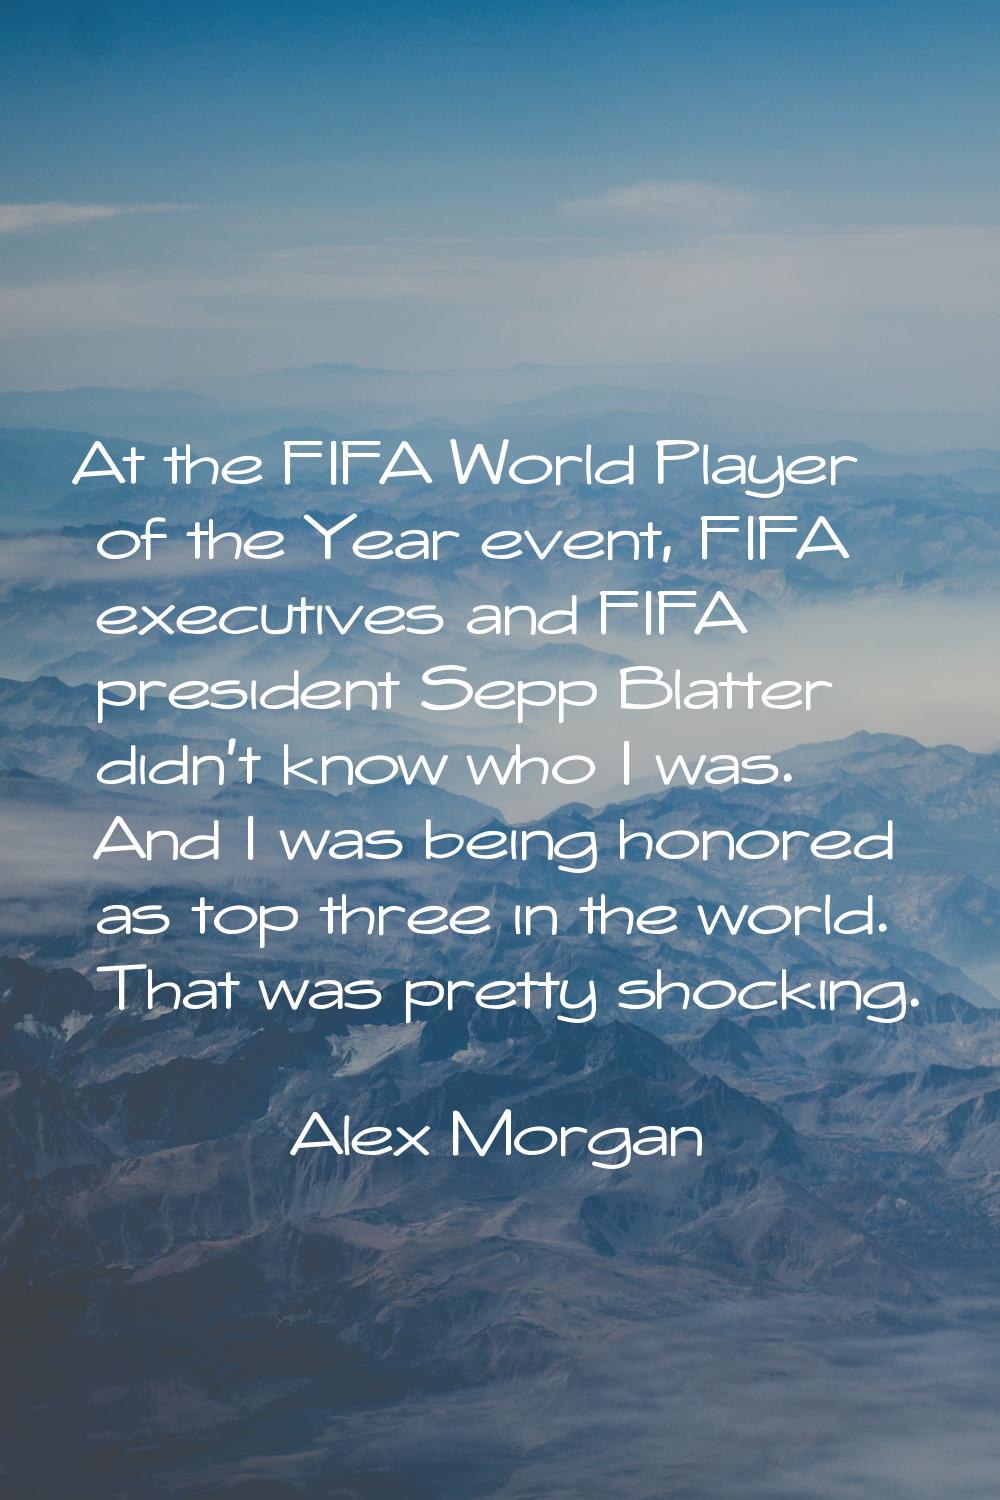 At the FIFA World Player of the Year event, FIFA executives and FIFA president Sepp Blatter didn't 